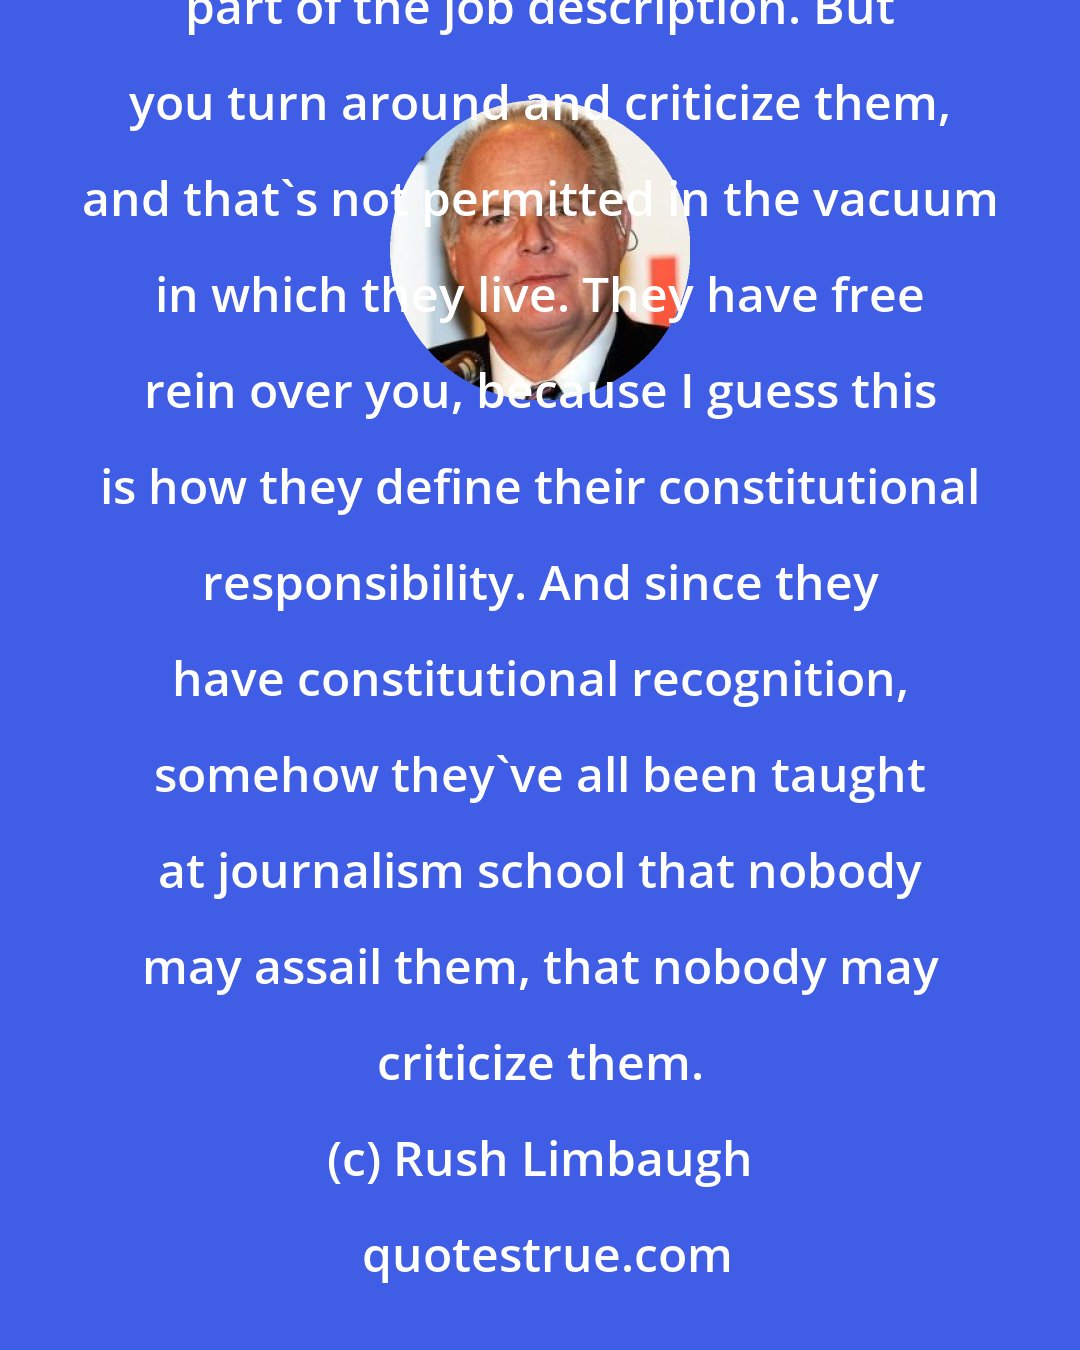 Rush Limbaugh: The media is fully fine and hunky-dory with the idea that they may destroy somebody, and they think that's part of the job description. But you turn around and criticize them, and that's not permitted in the vacuum in which they live. They have free rein over you, because I guess this is how they define their constitutional responsibility. And since they have constitutional recognition, somehow they've all been taught at journalism school that nobody may assail them, that nobody may criticize them.